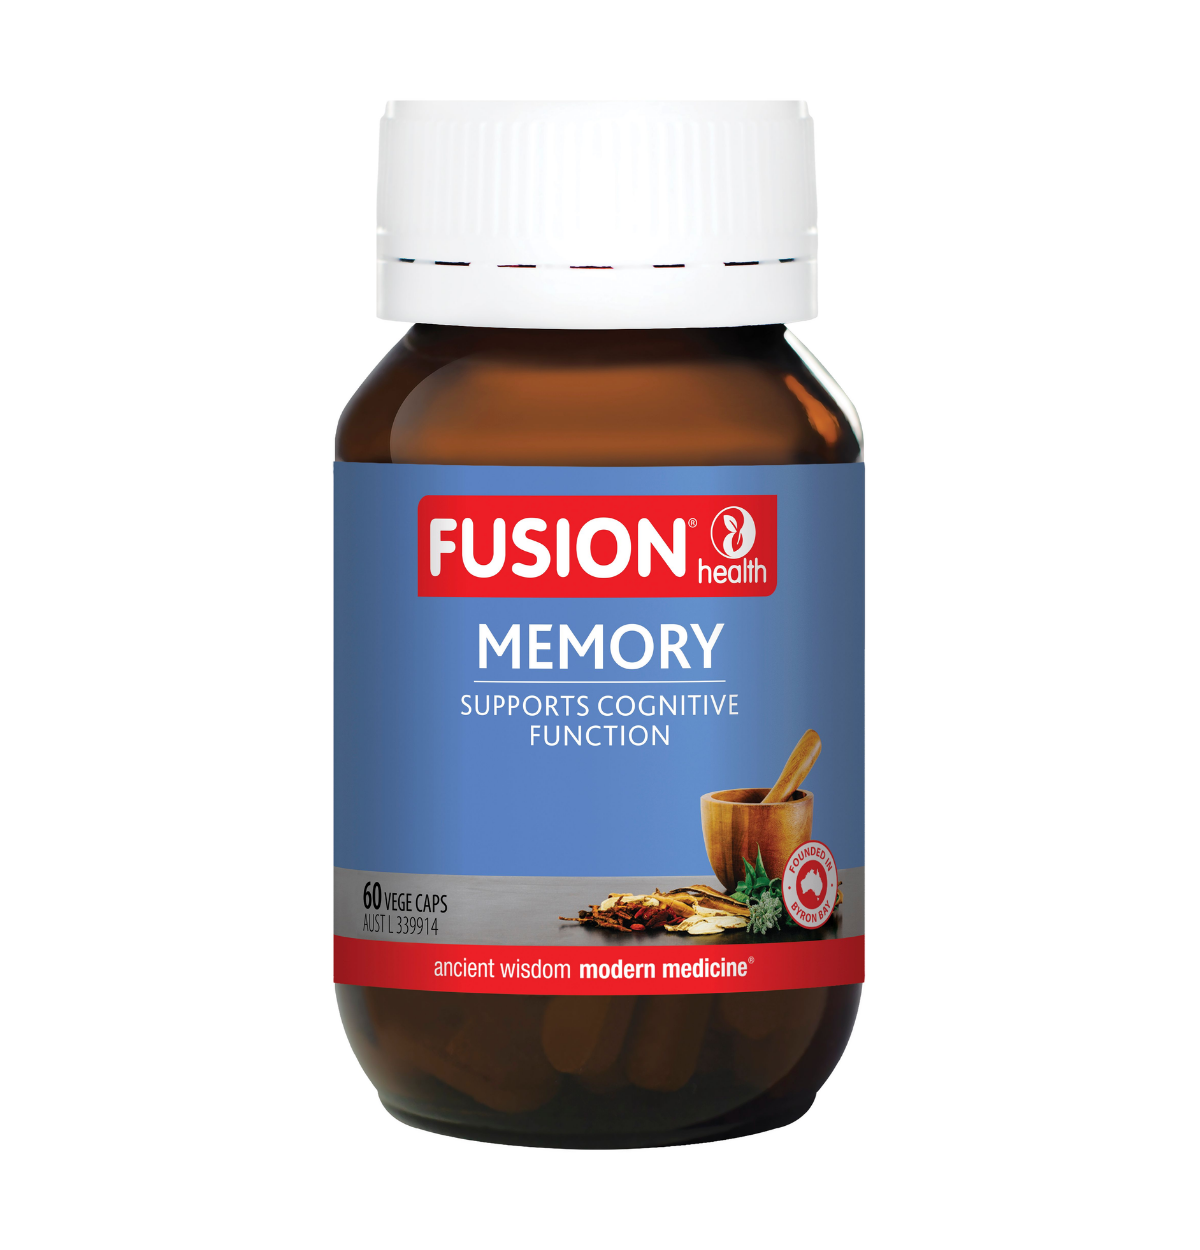 FUSION .2, MEMORY SUPPORTS COGNITIVE FUNCTION EUCEN QTS Gl D 